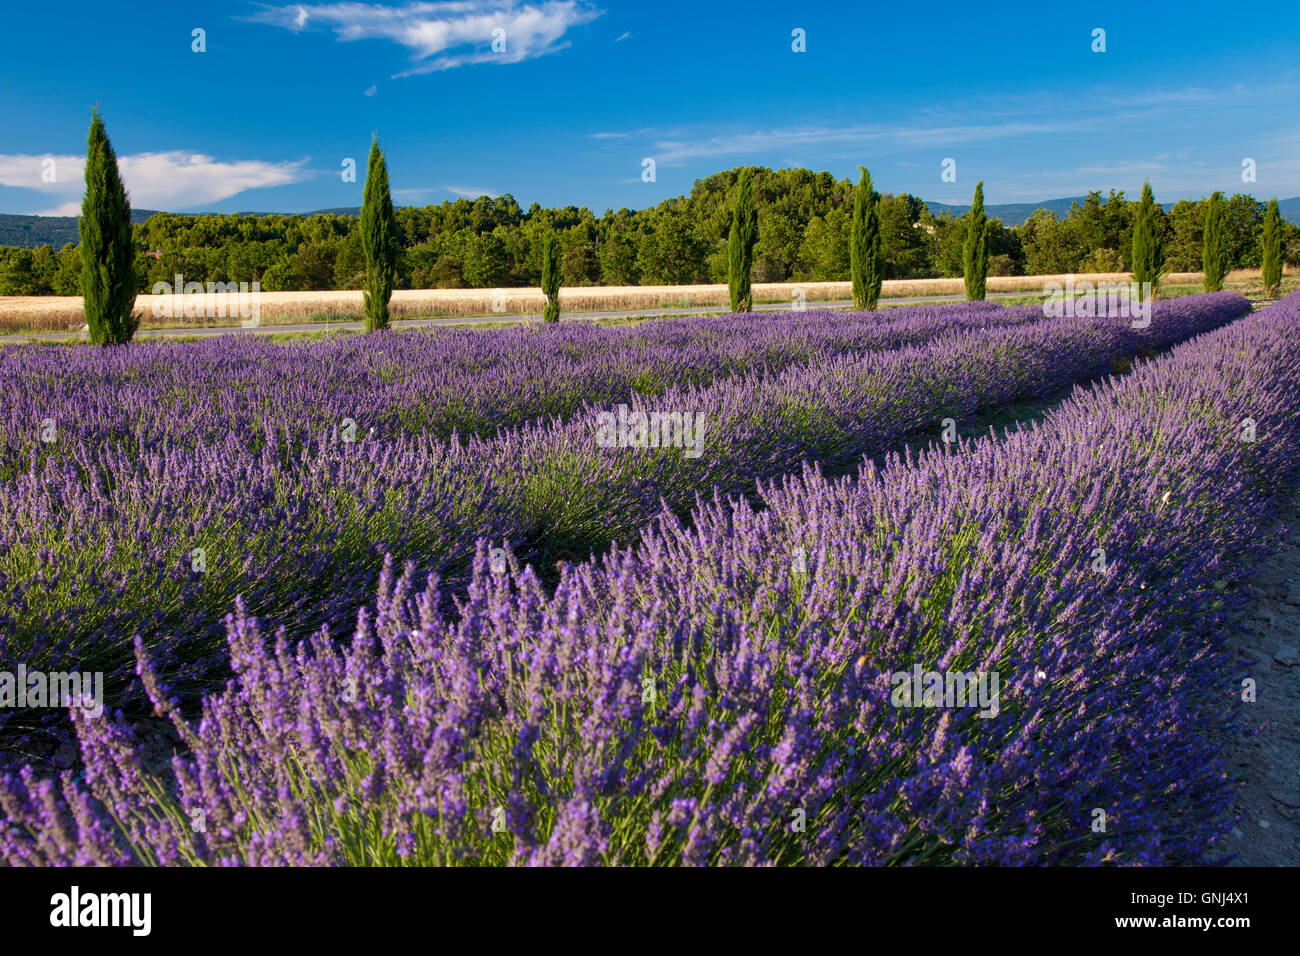 Rows of lavender, Provence, France Stock Photo